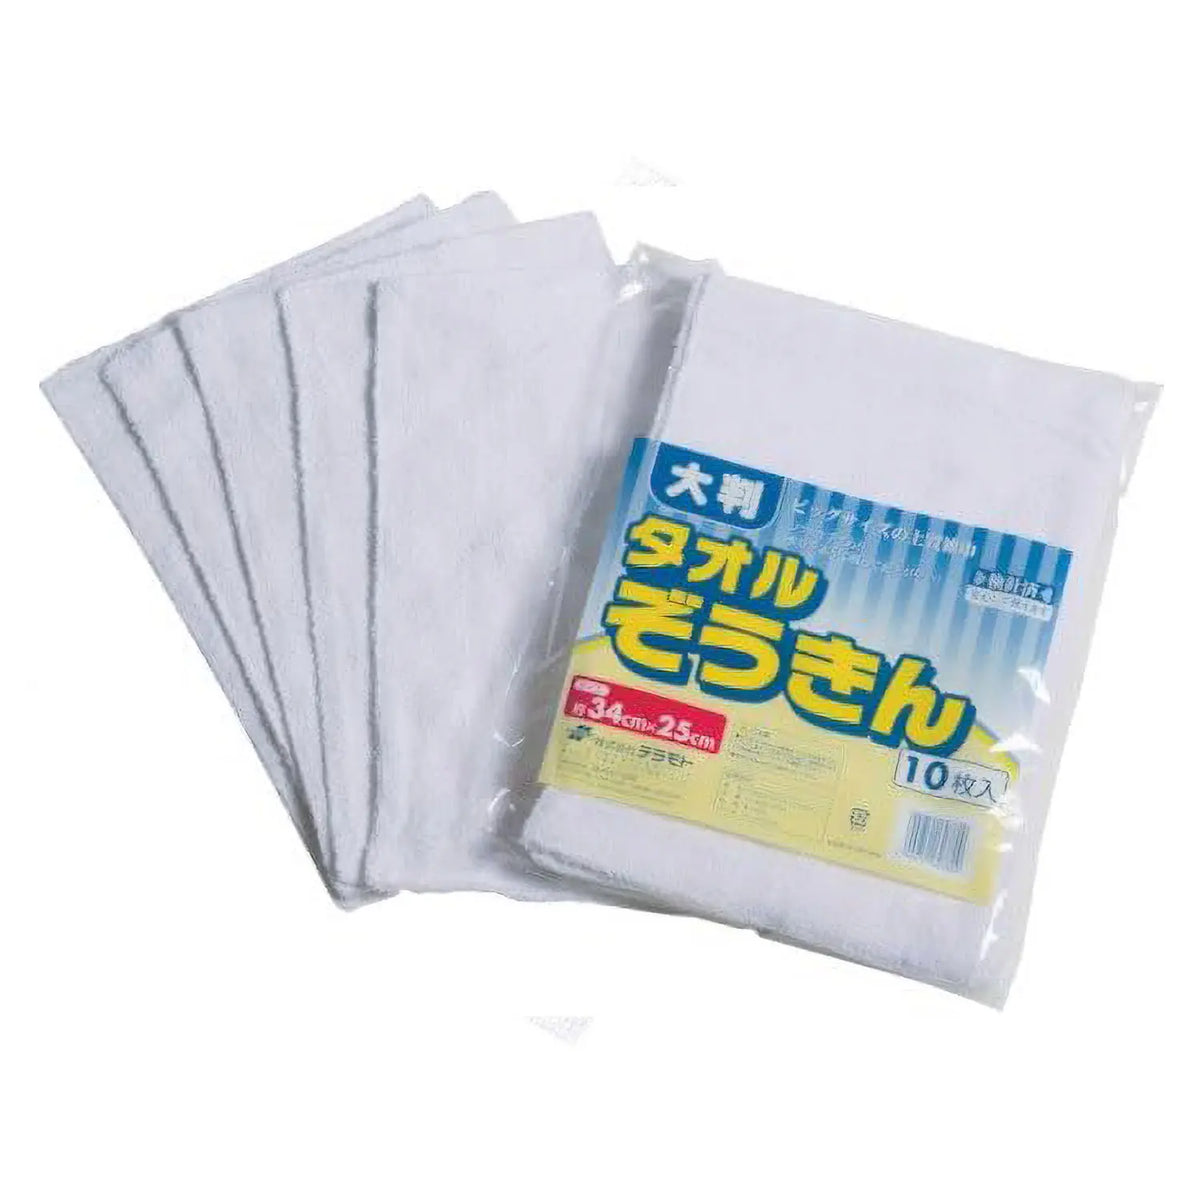 TERAMOTO Cotton Large Cleaning Cloth 340x250mm 10 pcs